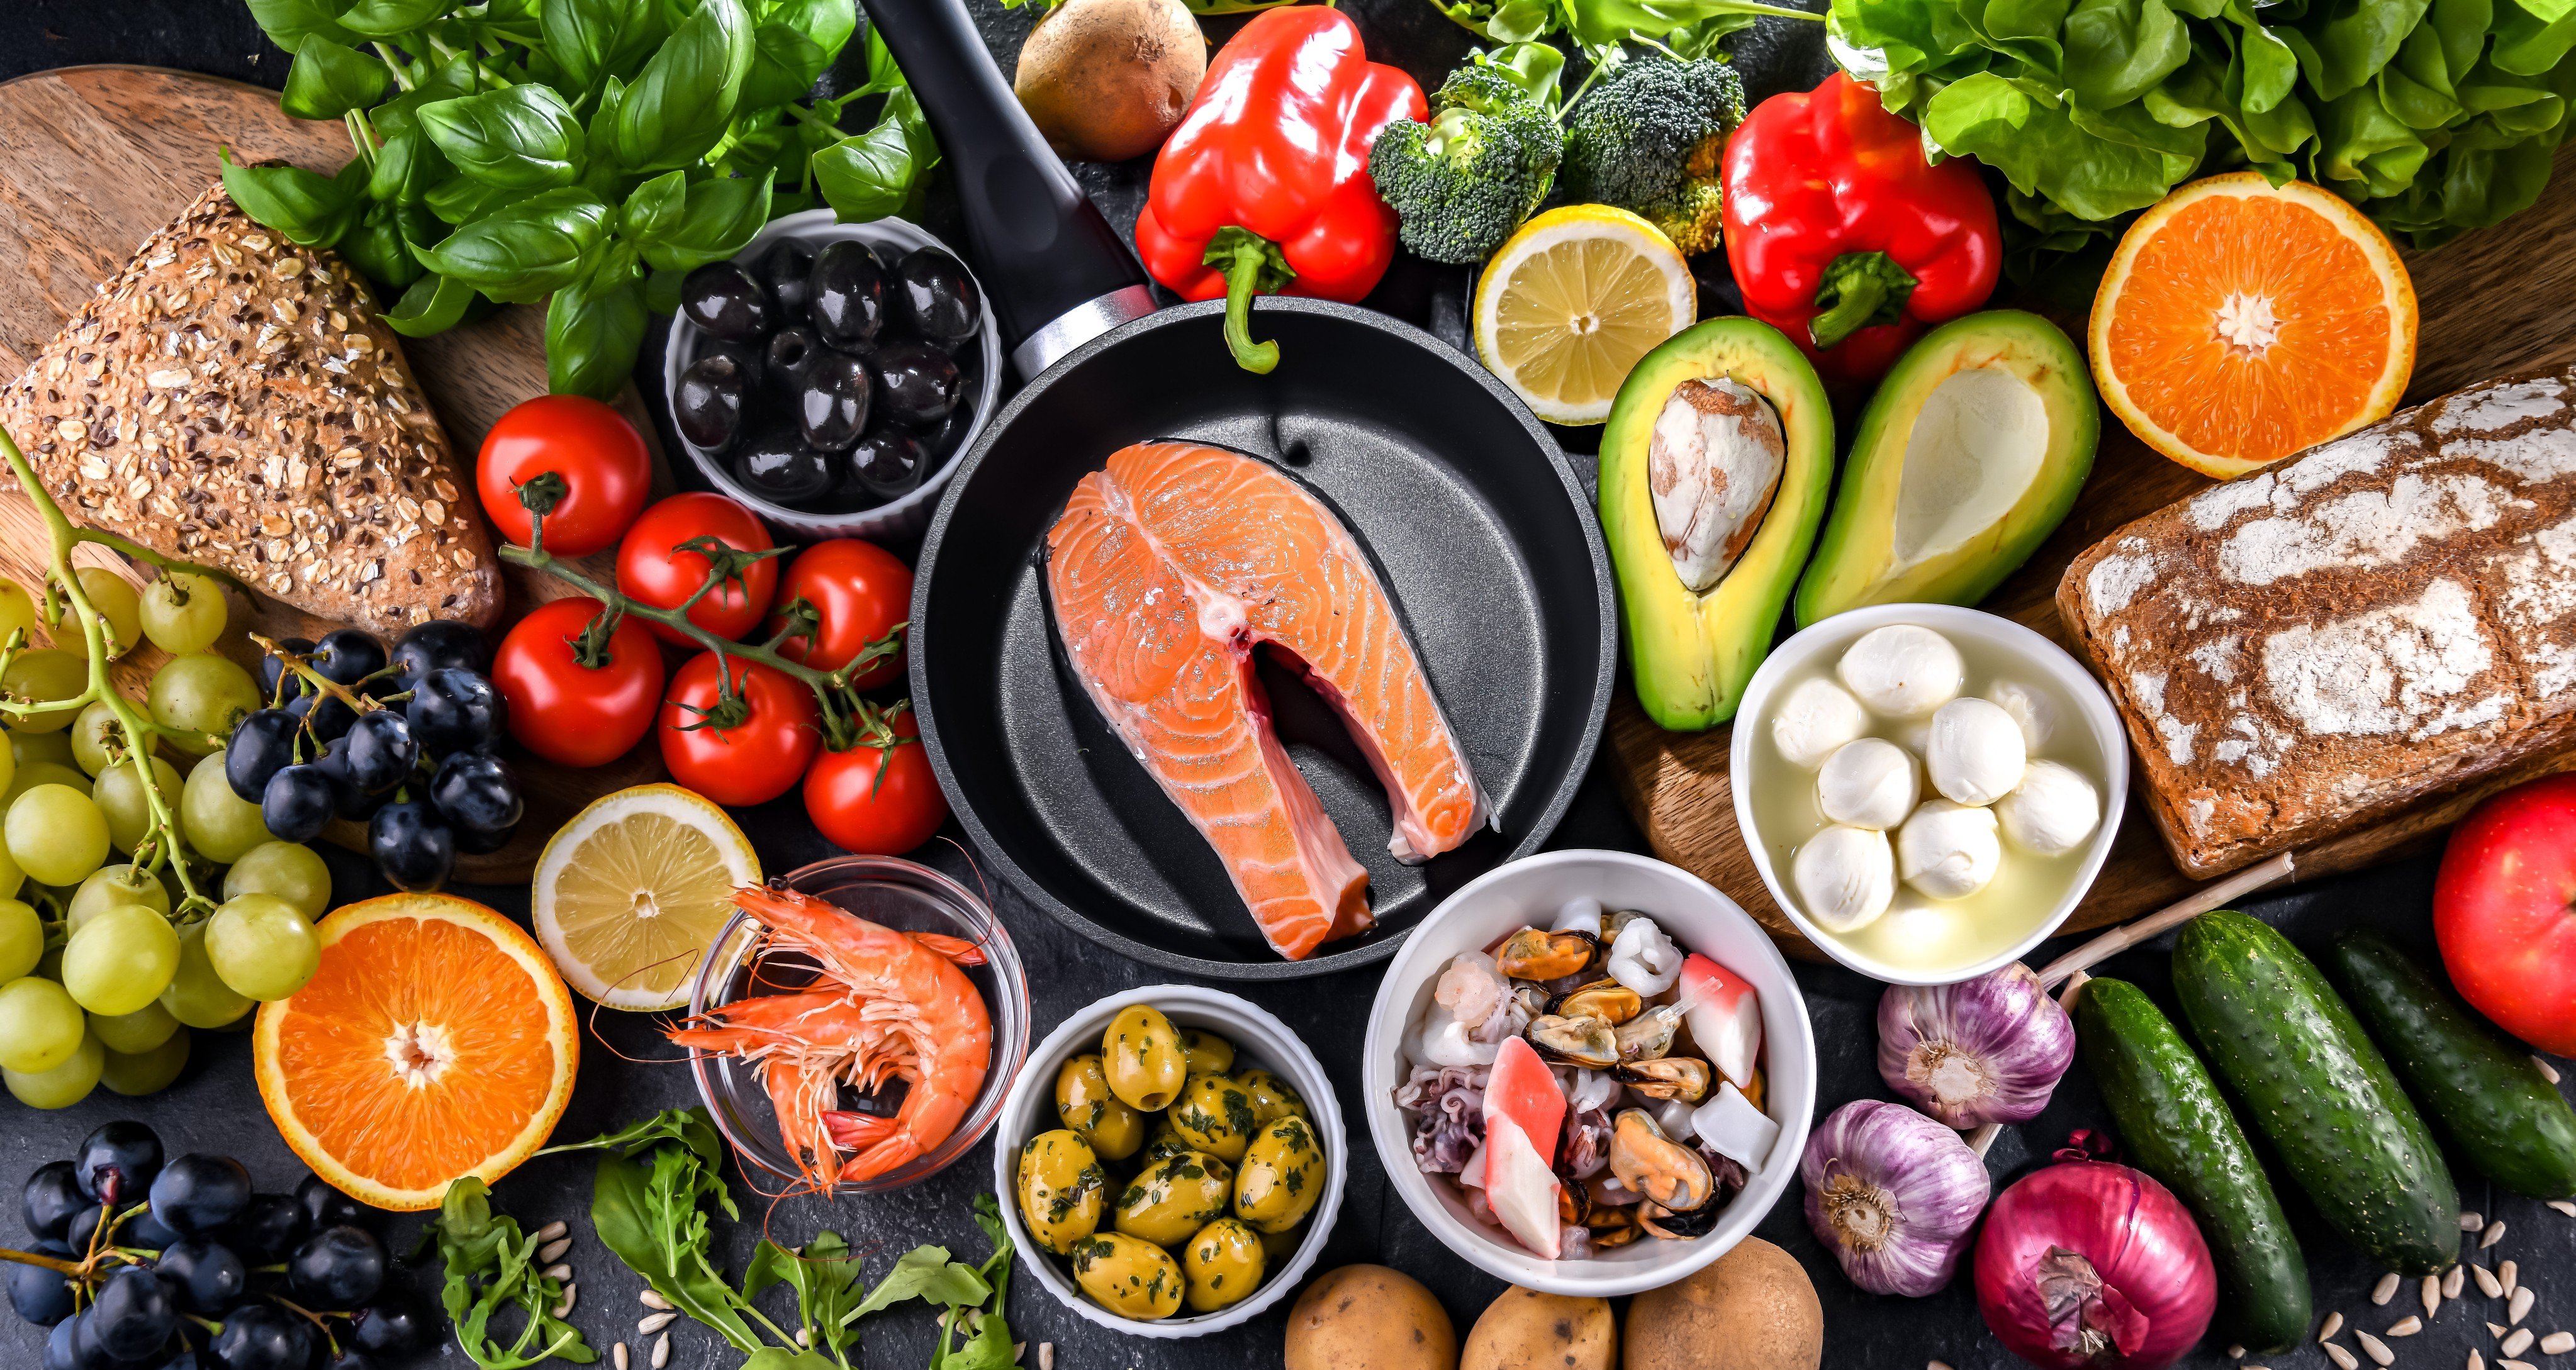 Food products representing the Mediterranean diet, which may improve overall health status. Photo: Shutterstock